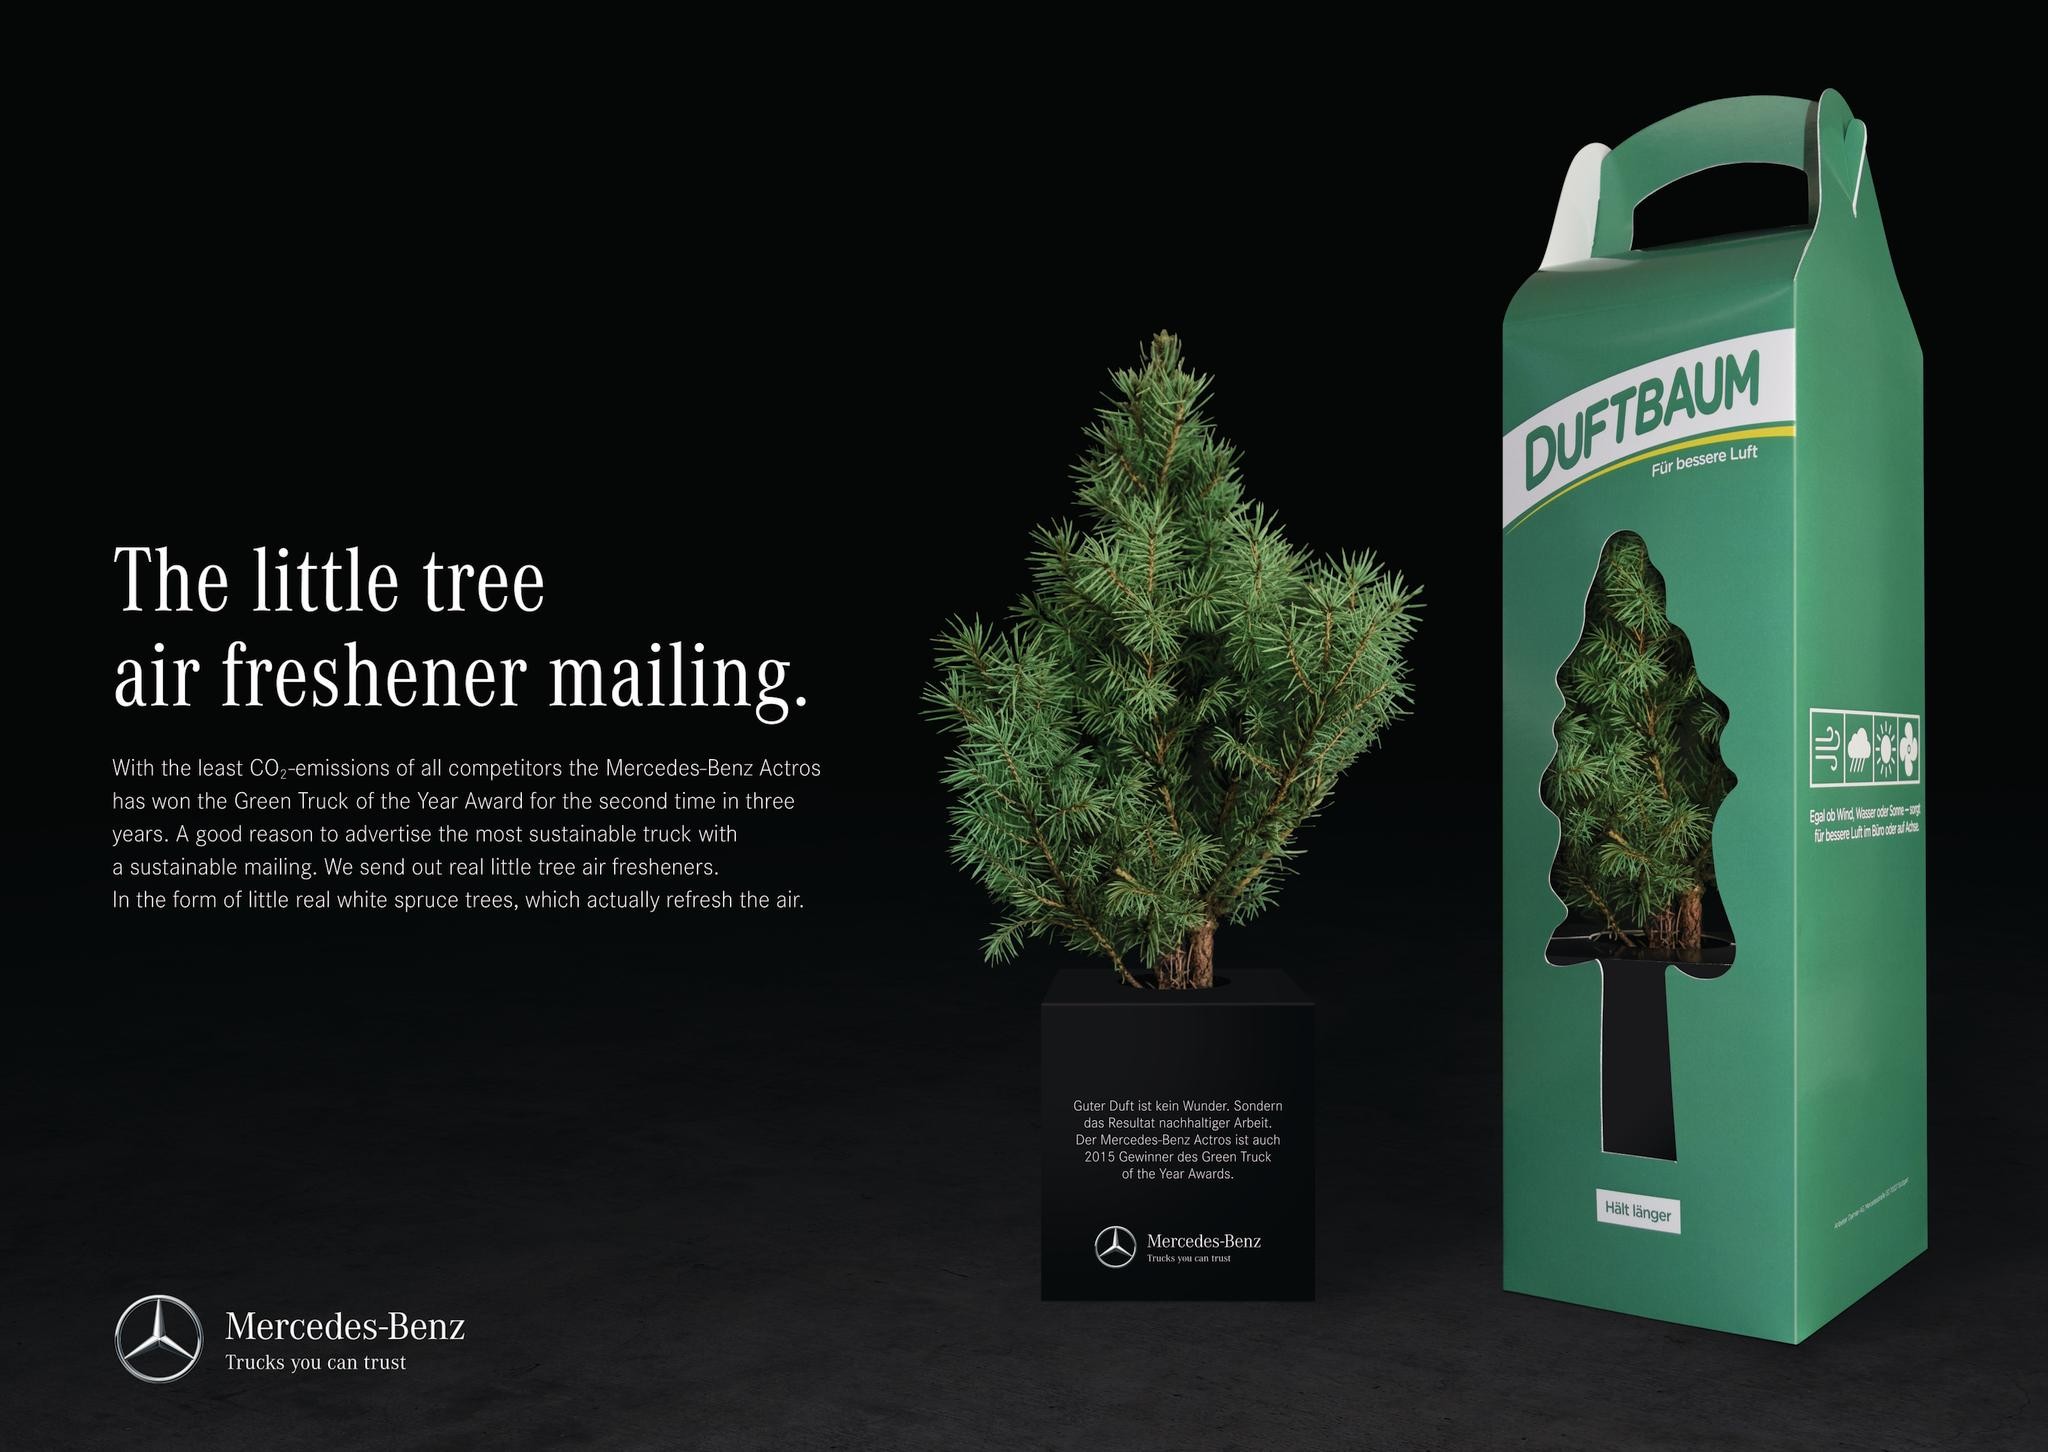 The little tree air freshener mailing.